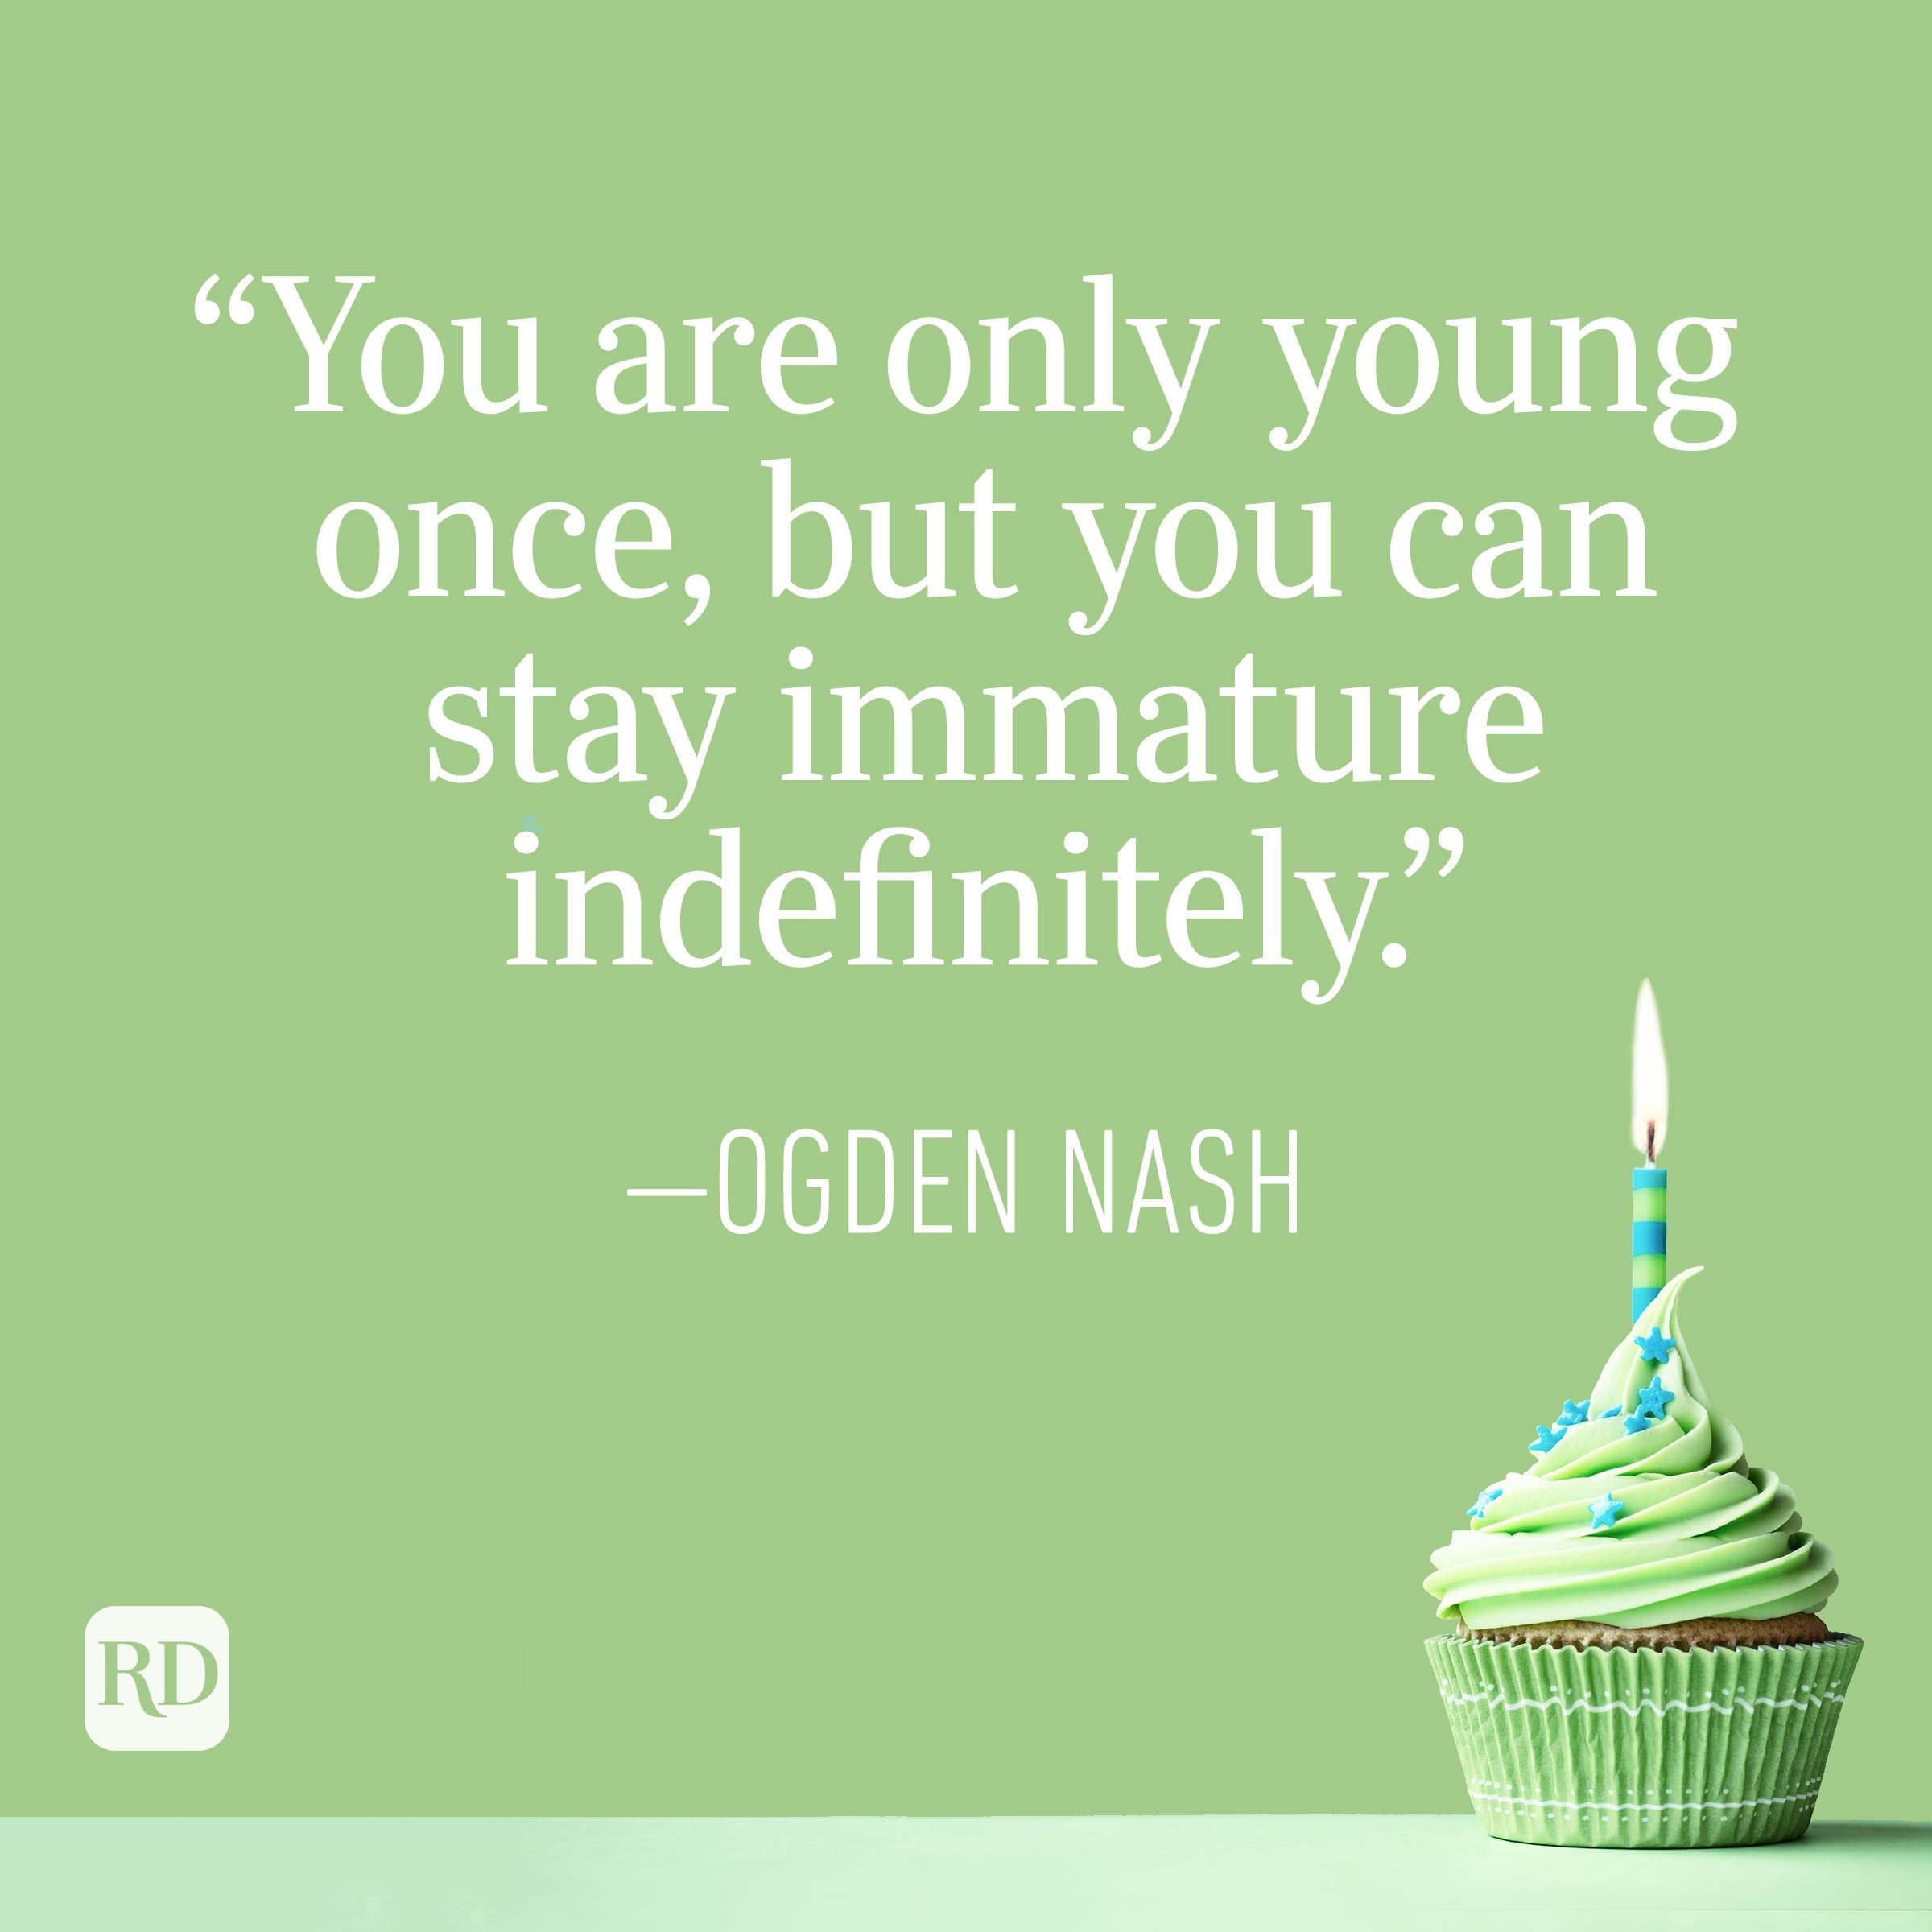 "You are only young once, but you can stay immature indefinitely." —Ogden Nash